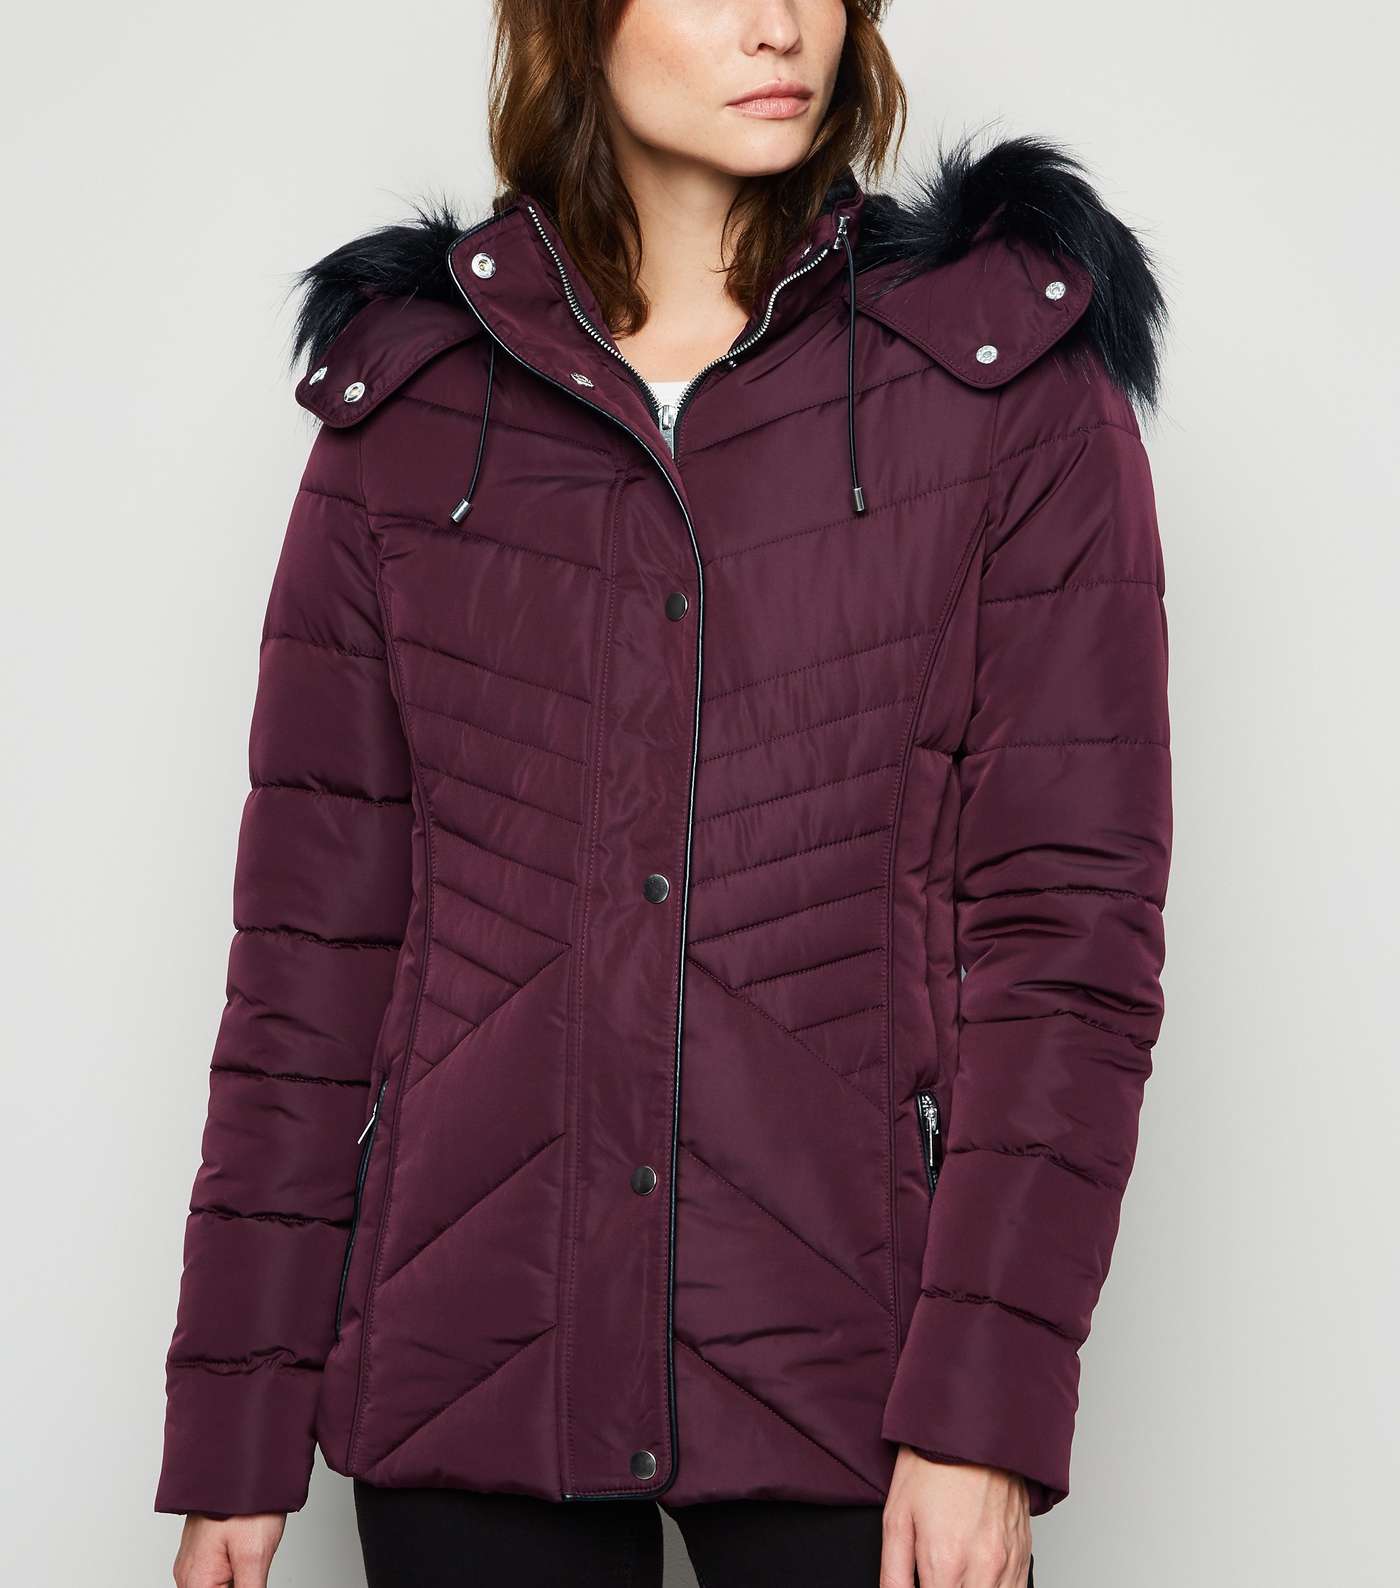 Tall Burgundy Faux Fur Trim Fitted Puffer Jacket